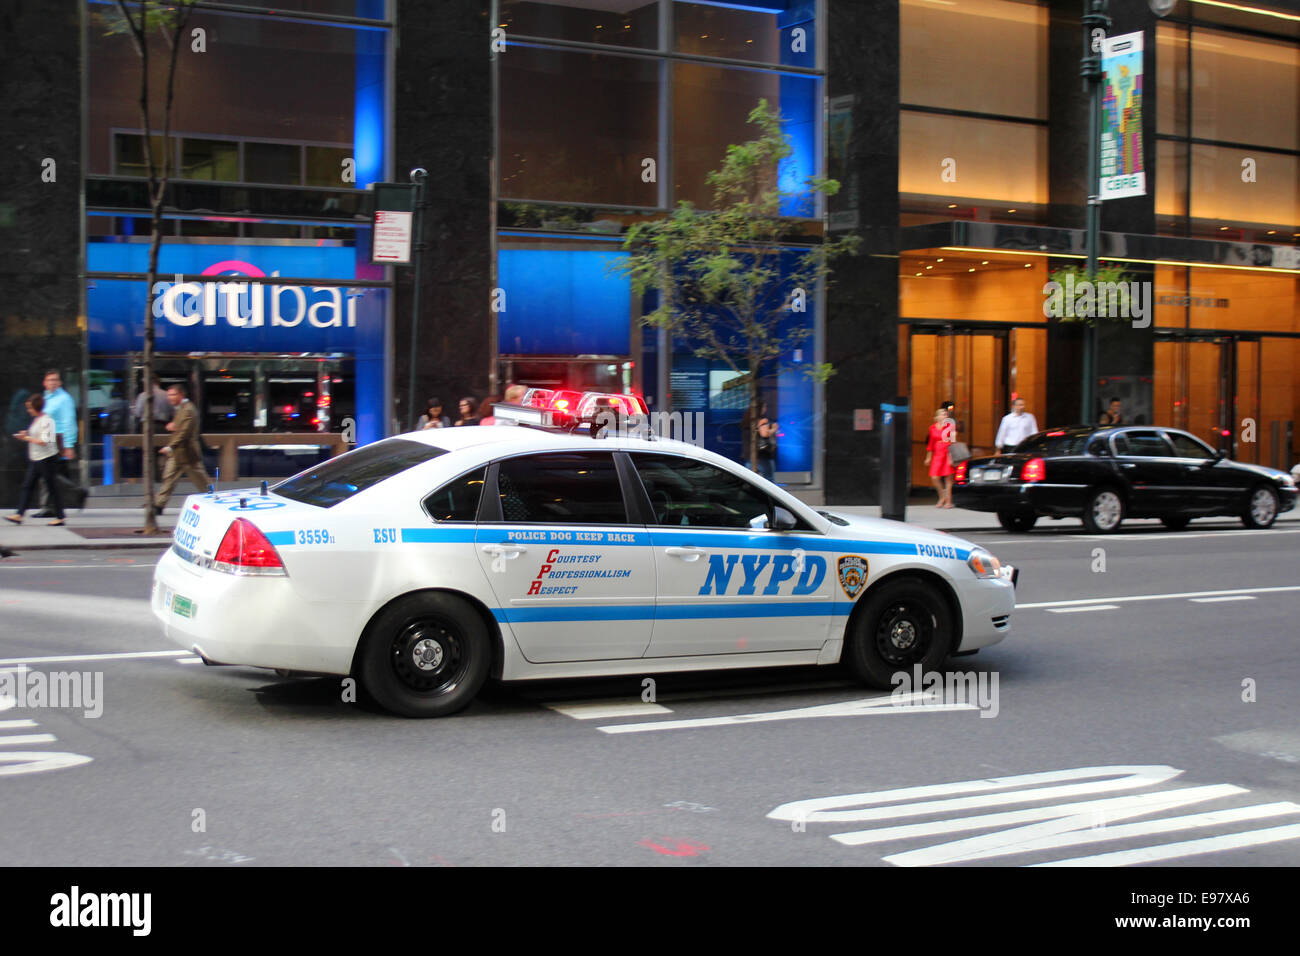 New York City Police Department vehicle responding to an incident. Stock Photo